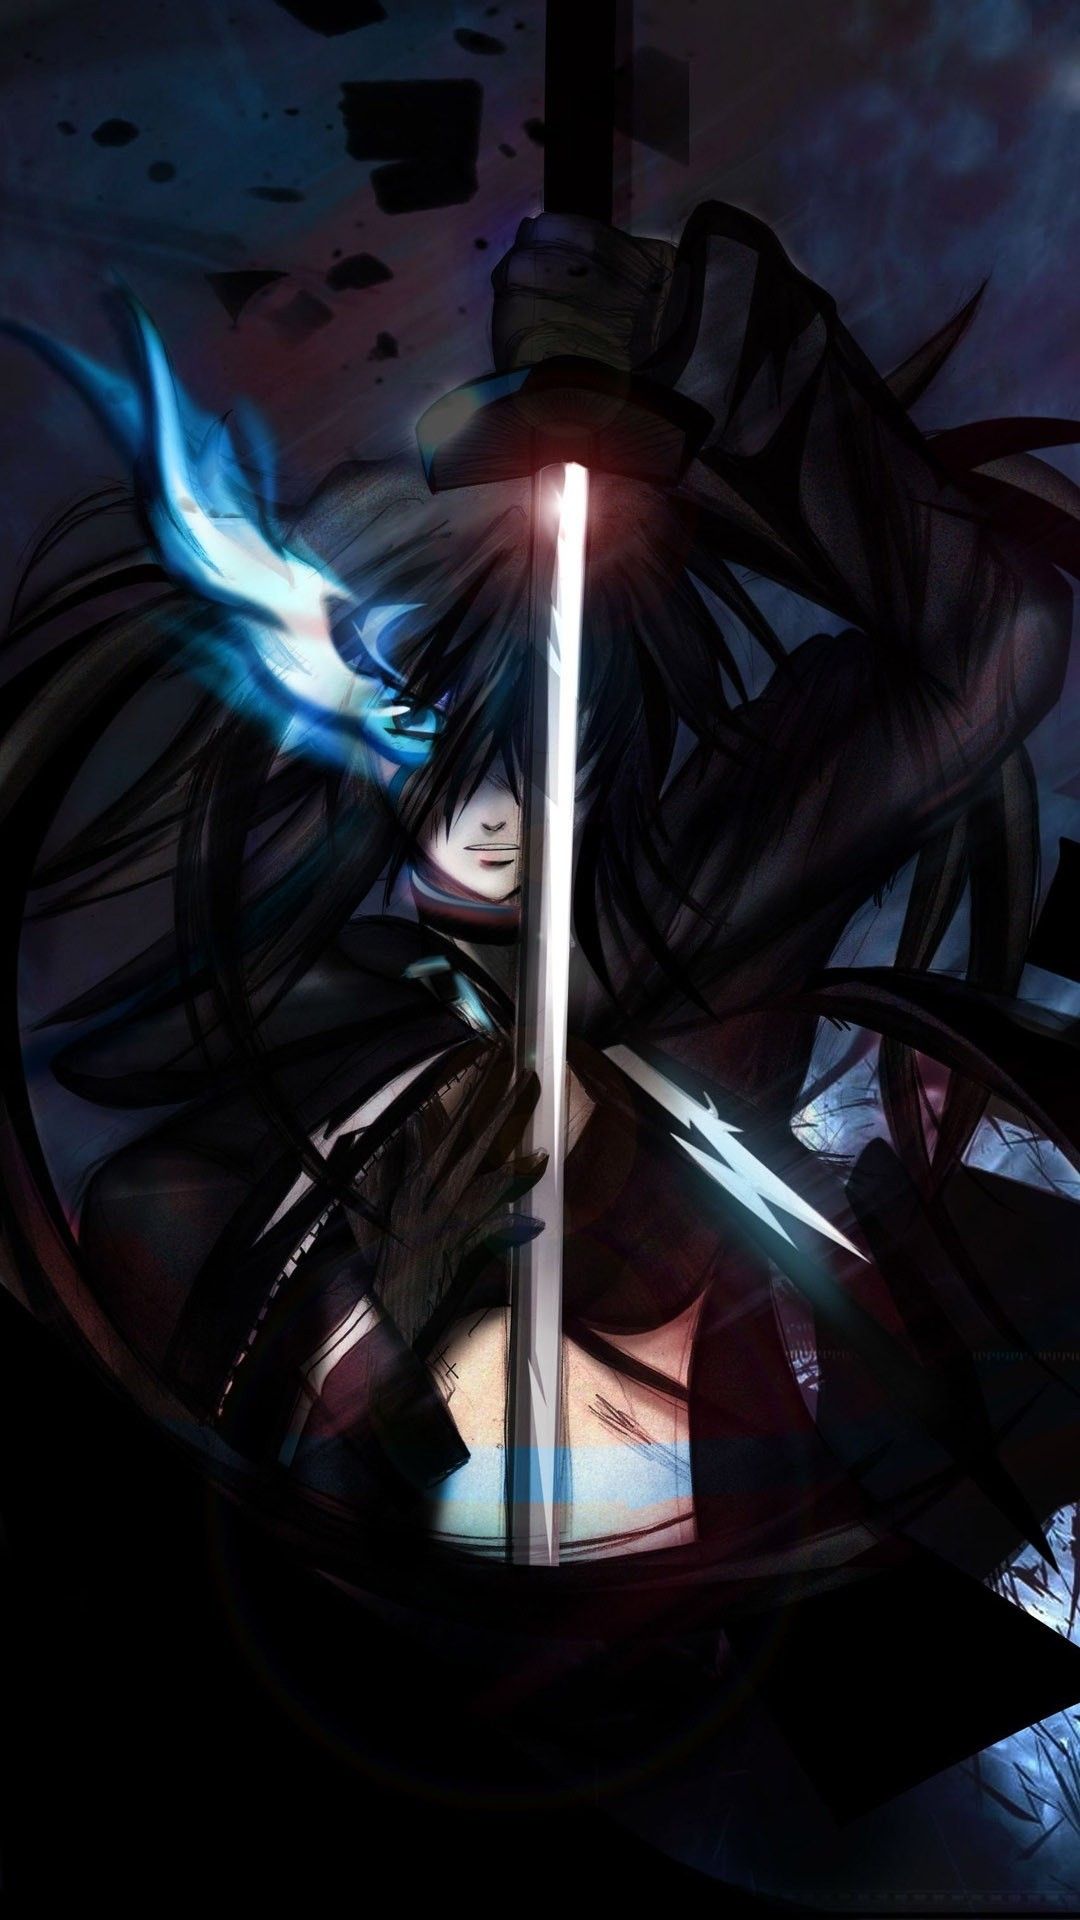 Badass Anime iPhone Wallpapers - Wallpaper Cave